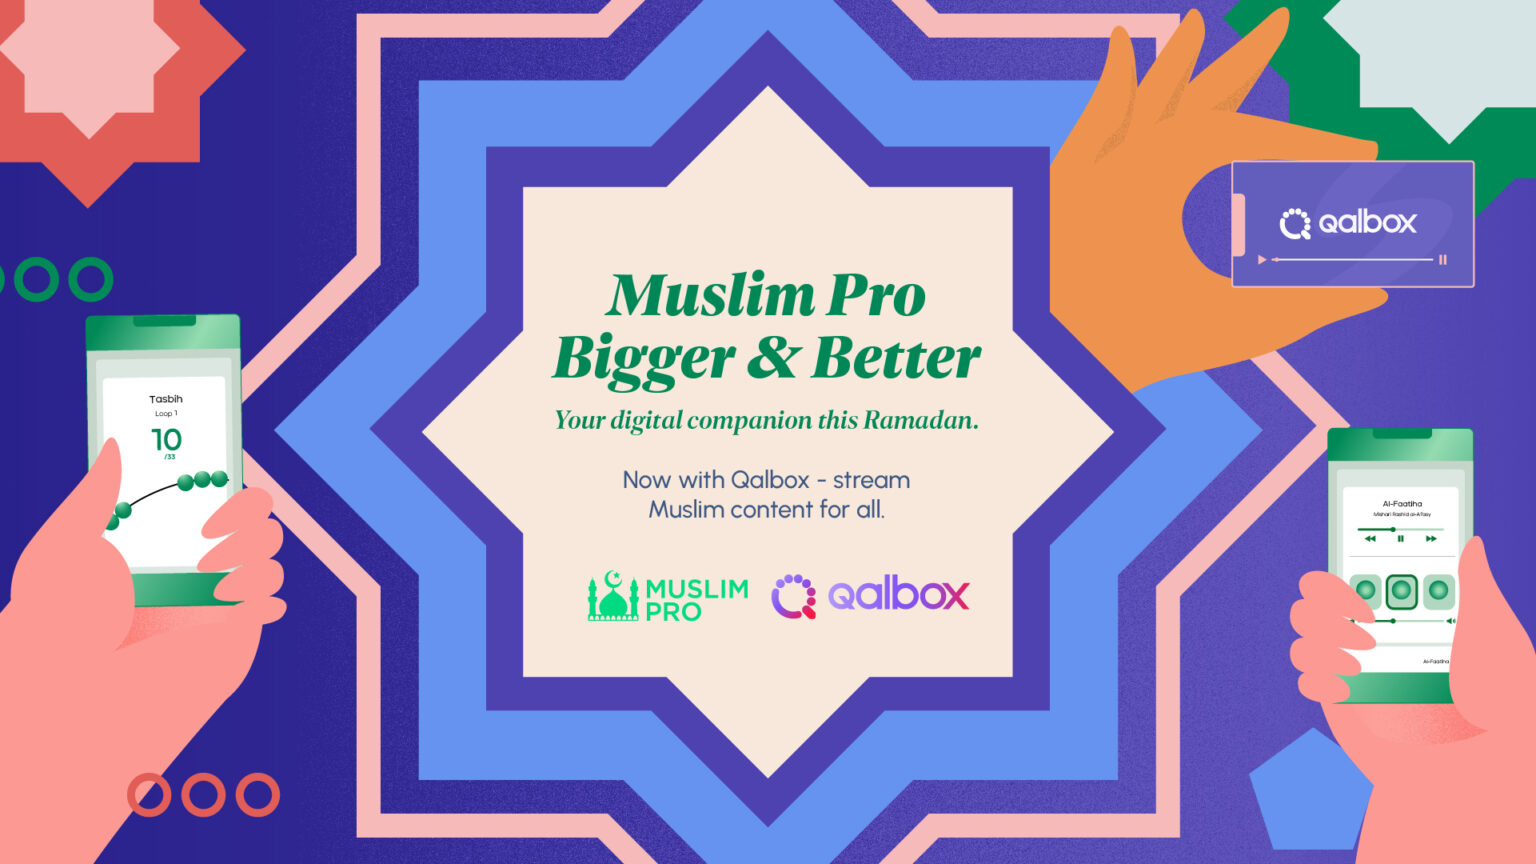 Muslim Pro releases enriching original content on its new streaming service Qalbox for Ramadan 2023